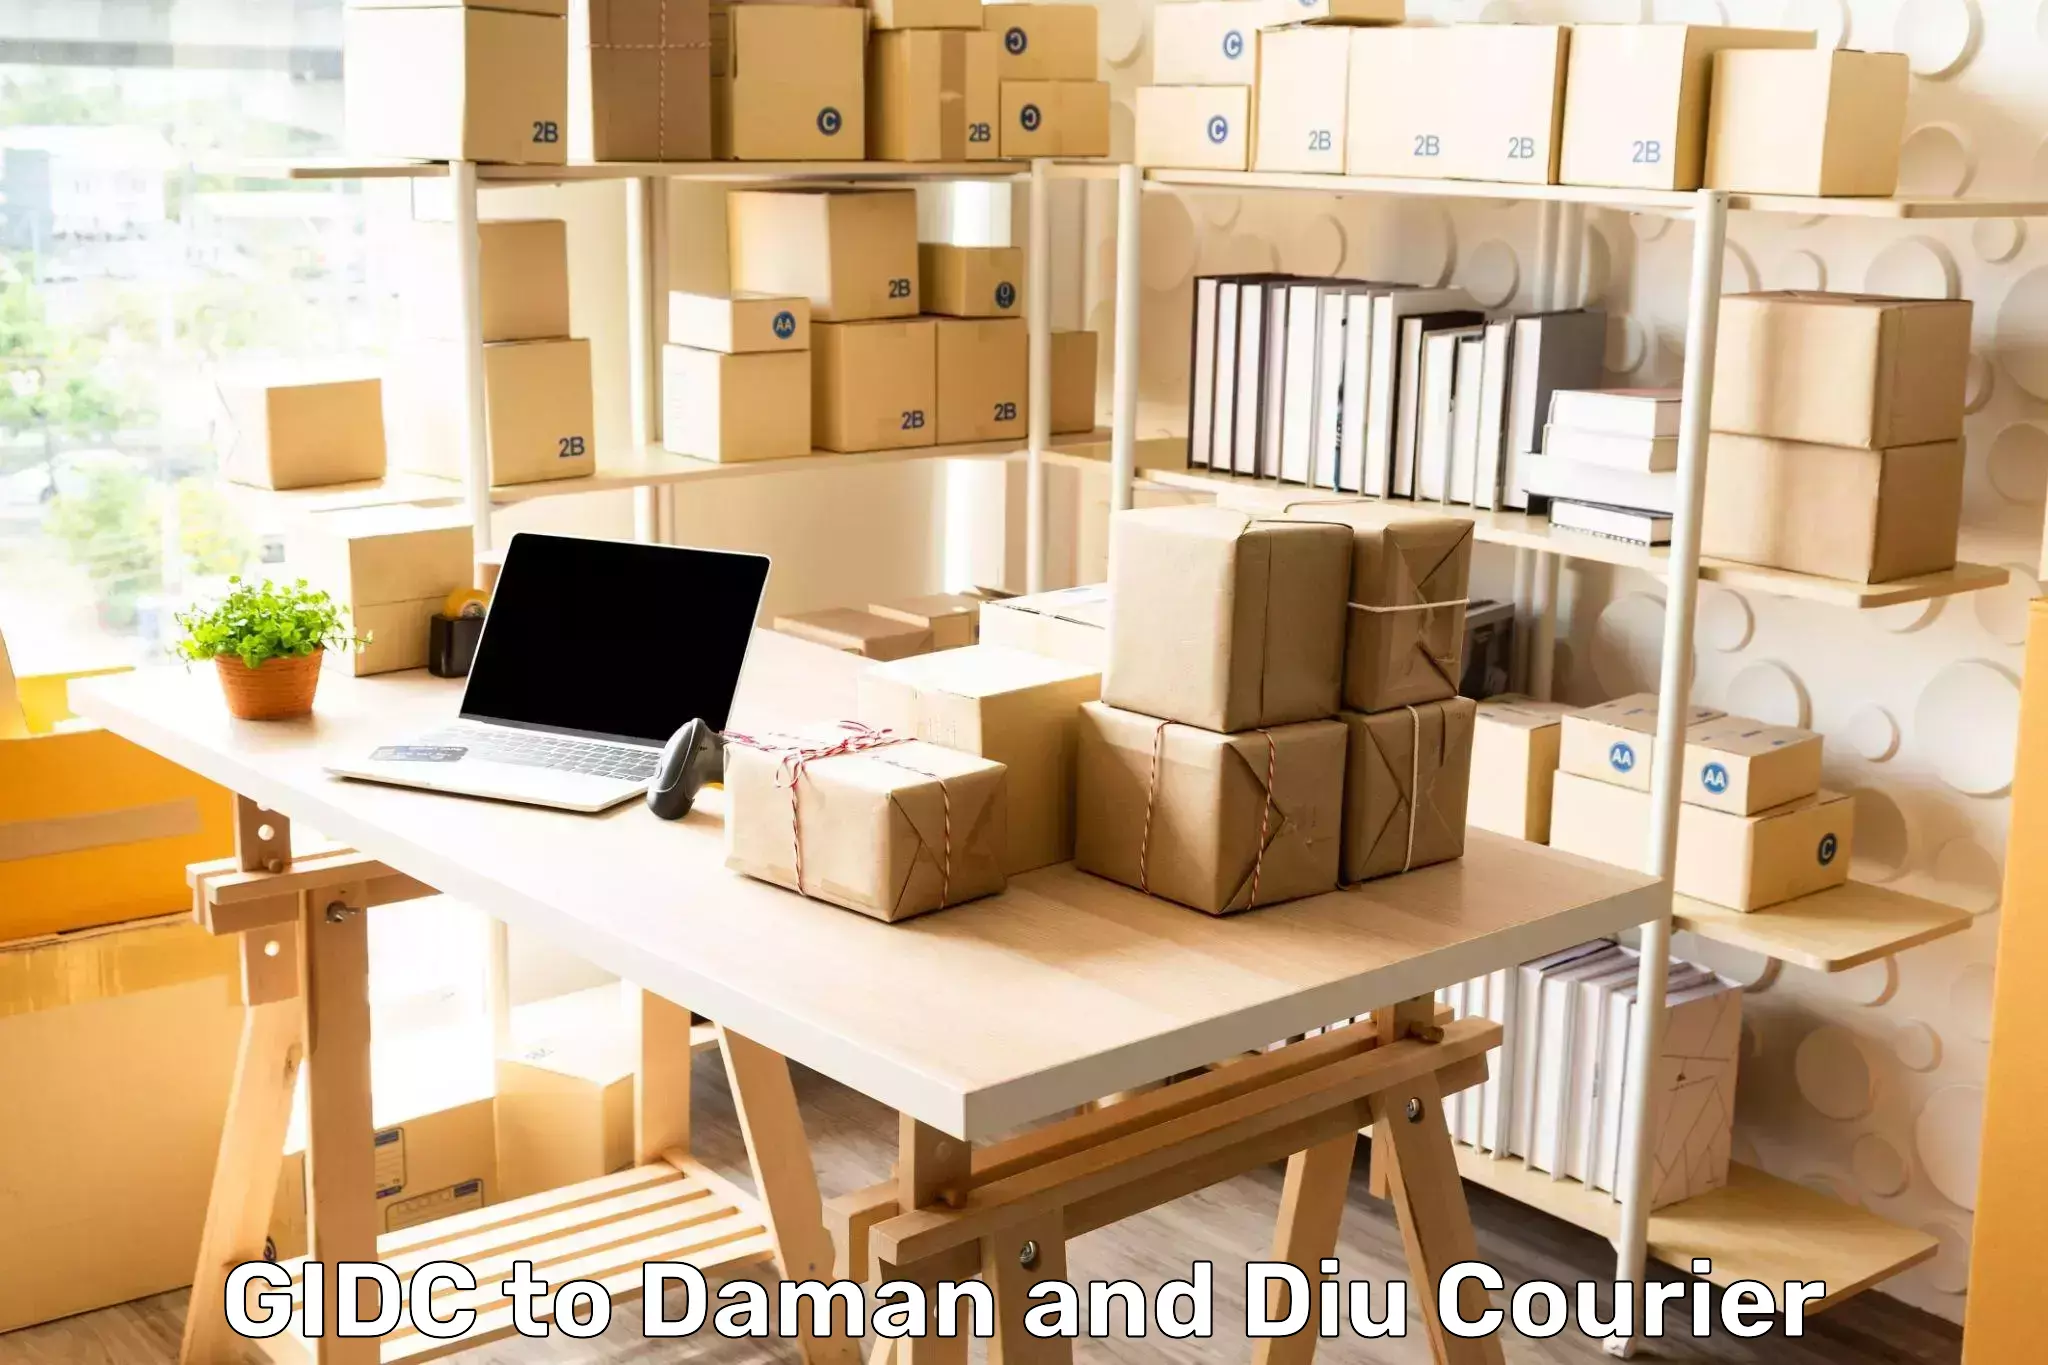 International courier networks GIDC to Daman and Diu